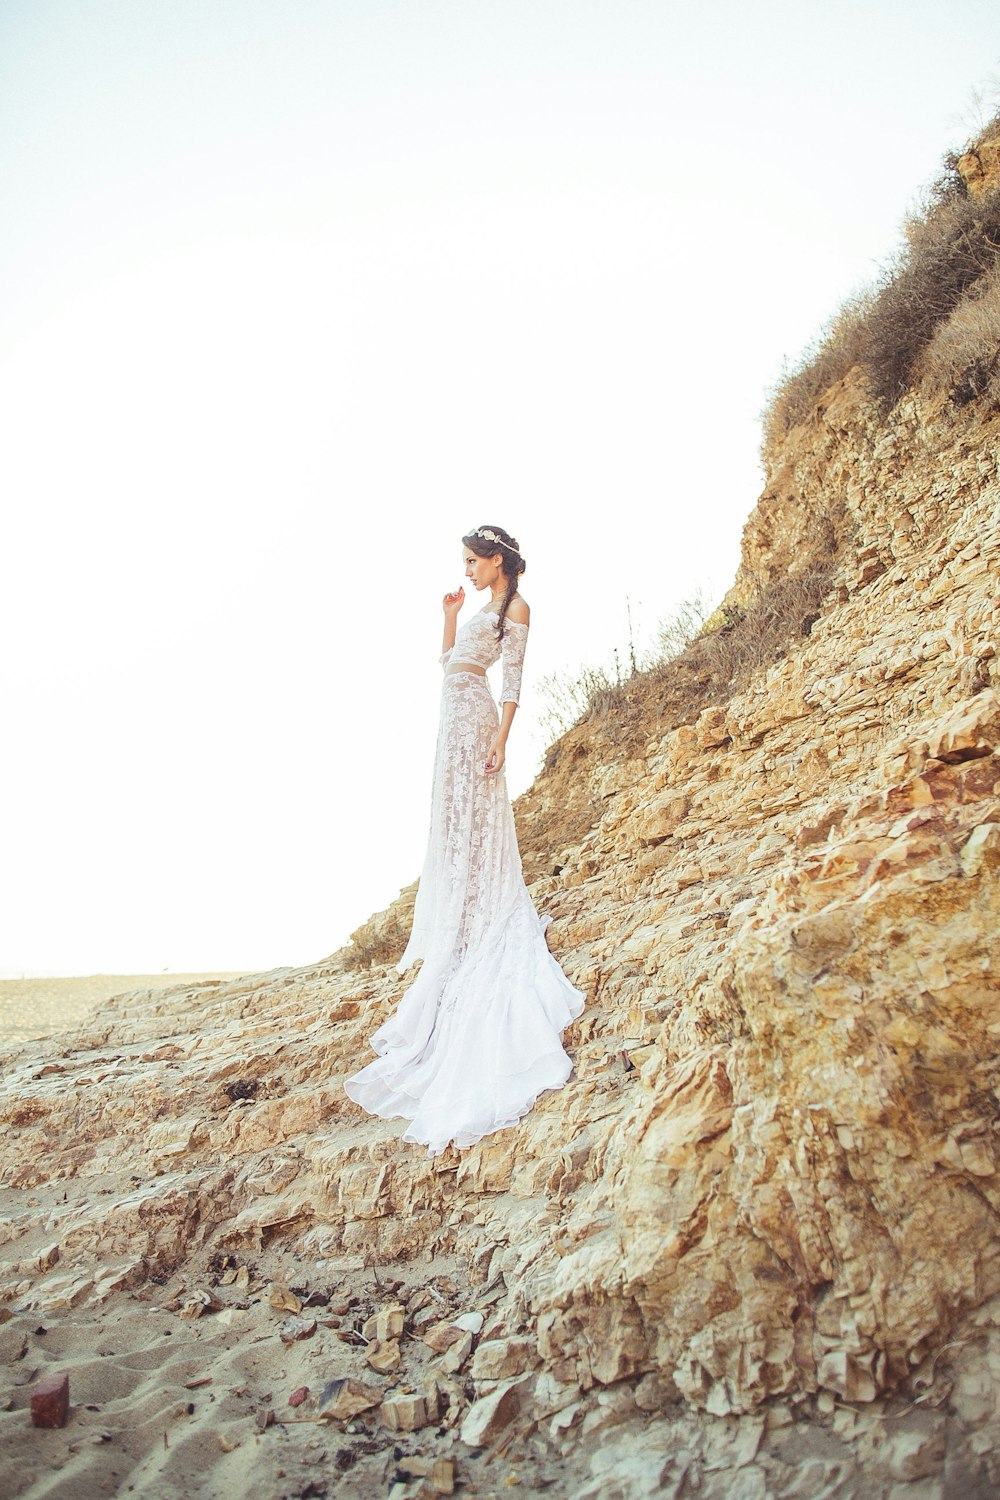 a person in a wedding dress standing on a rocky hill